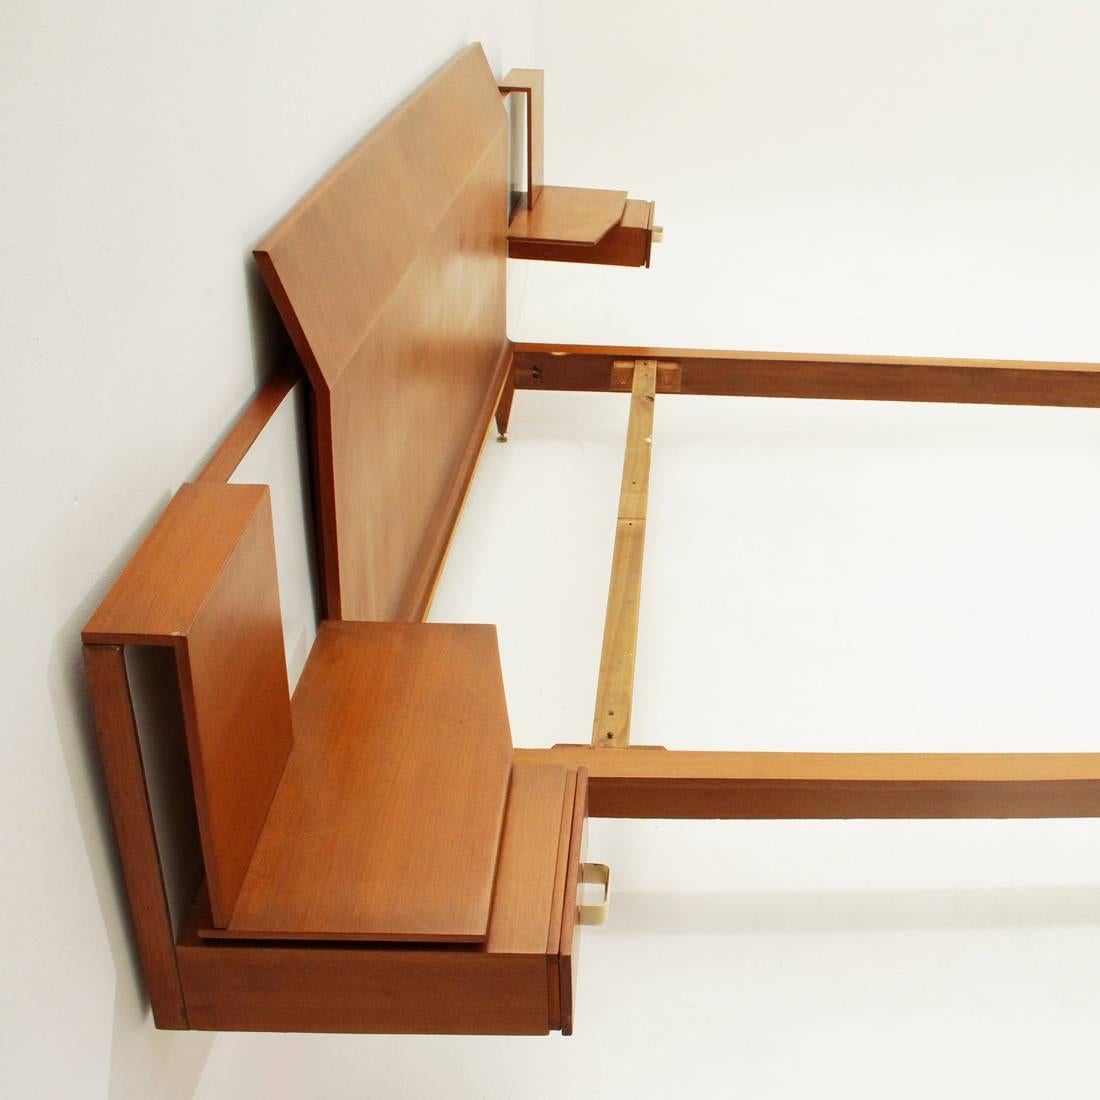 Italian Modernist Bed with Nightstand in Teak by Galleria Mobili d'Arte of Cantù, 1950s